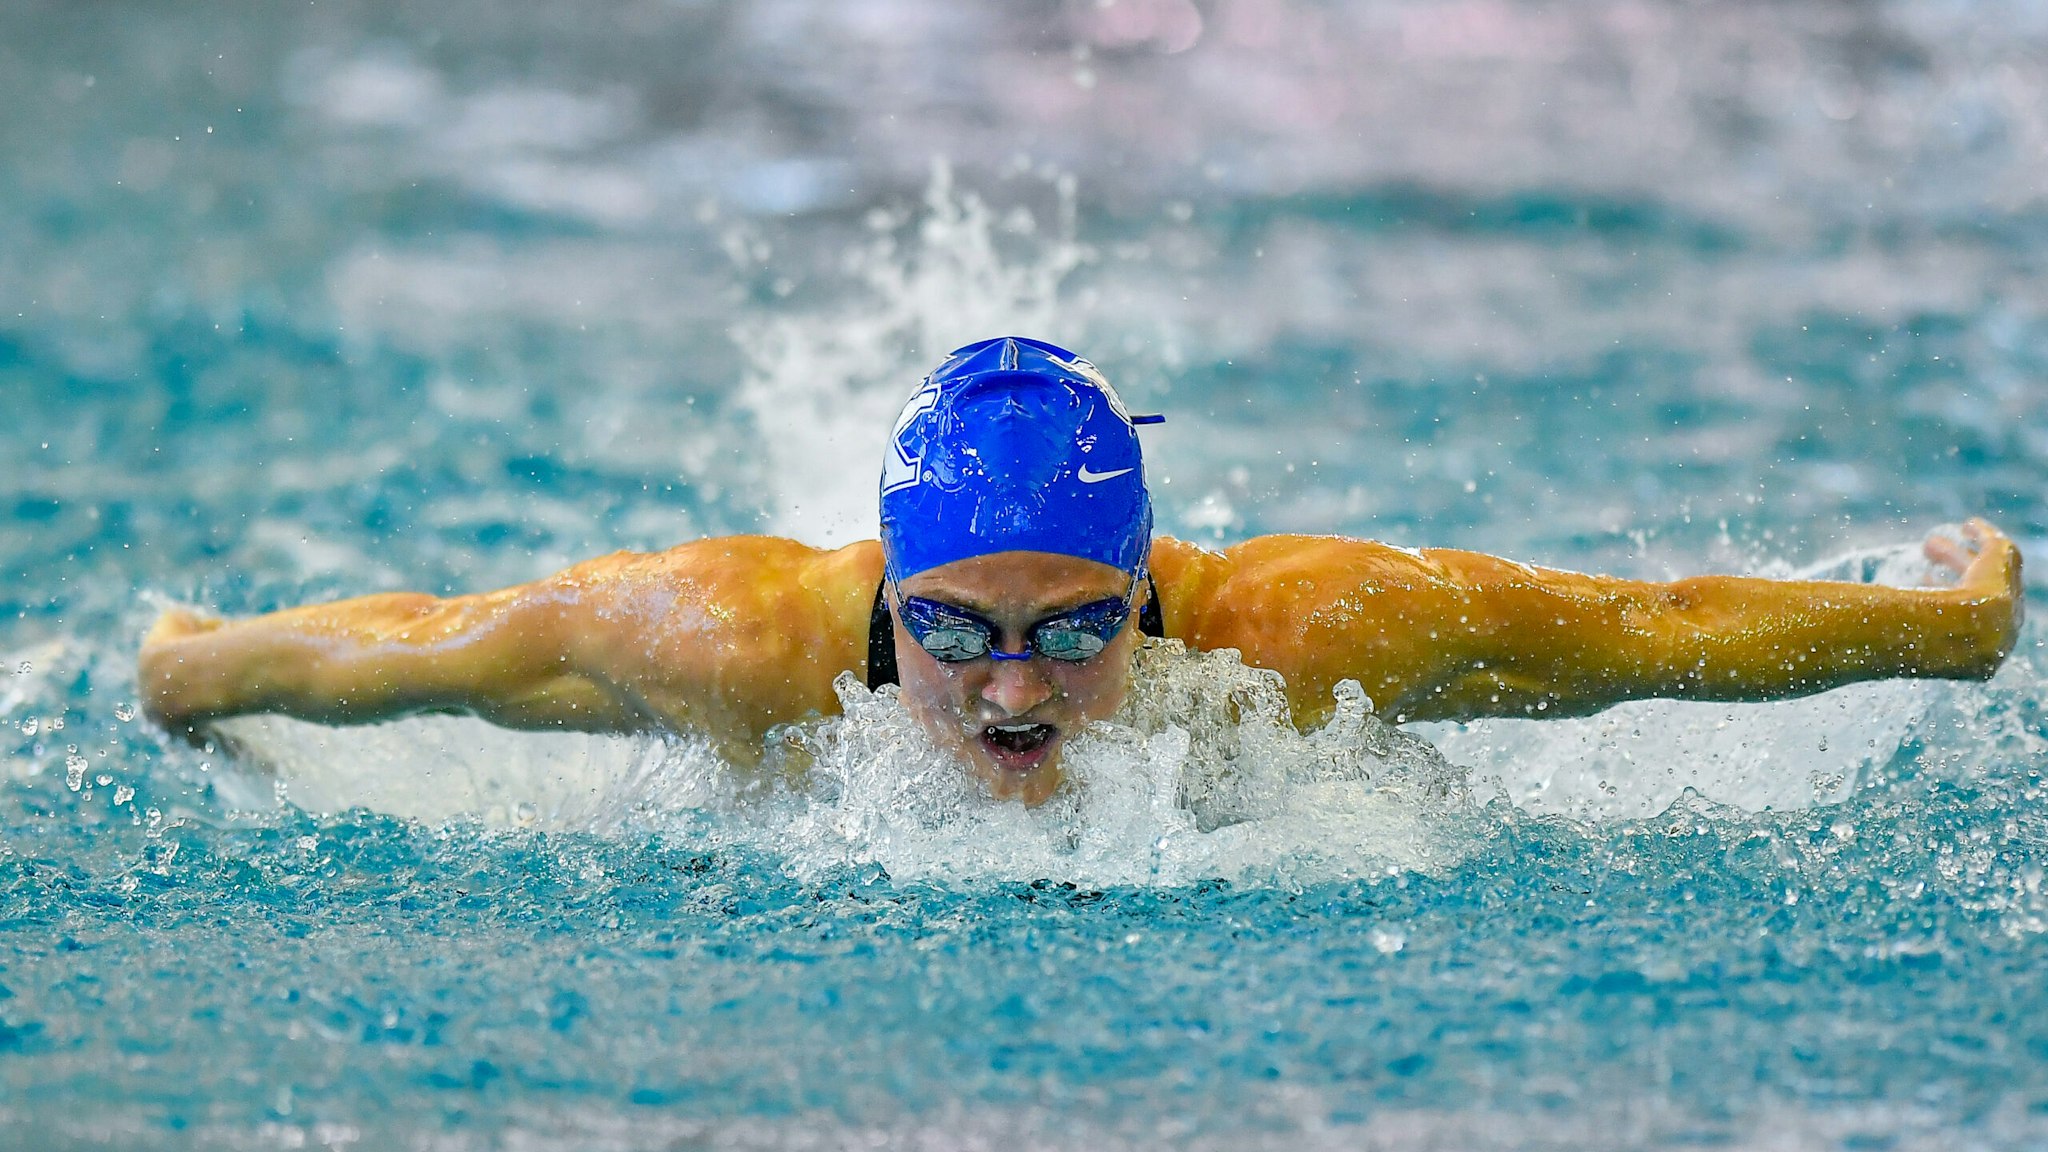 ATLANTA, GA - MARCH 19: Kentucky swimmer Riley Gaines swims the 200 Butterfly prelims at the NCAA Swimming and Diving Championships on March 19th, 2022 at the McAuley Aquatic Center in Atlanta, Georgia. (Photo by Rich von Biberstein/Icon Sportswire via Getty Images)